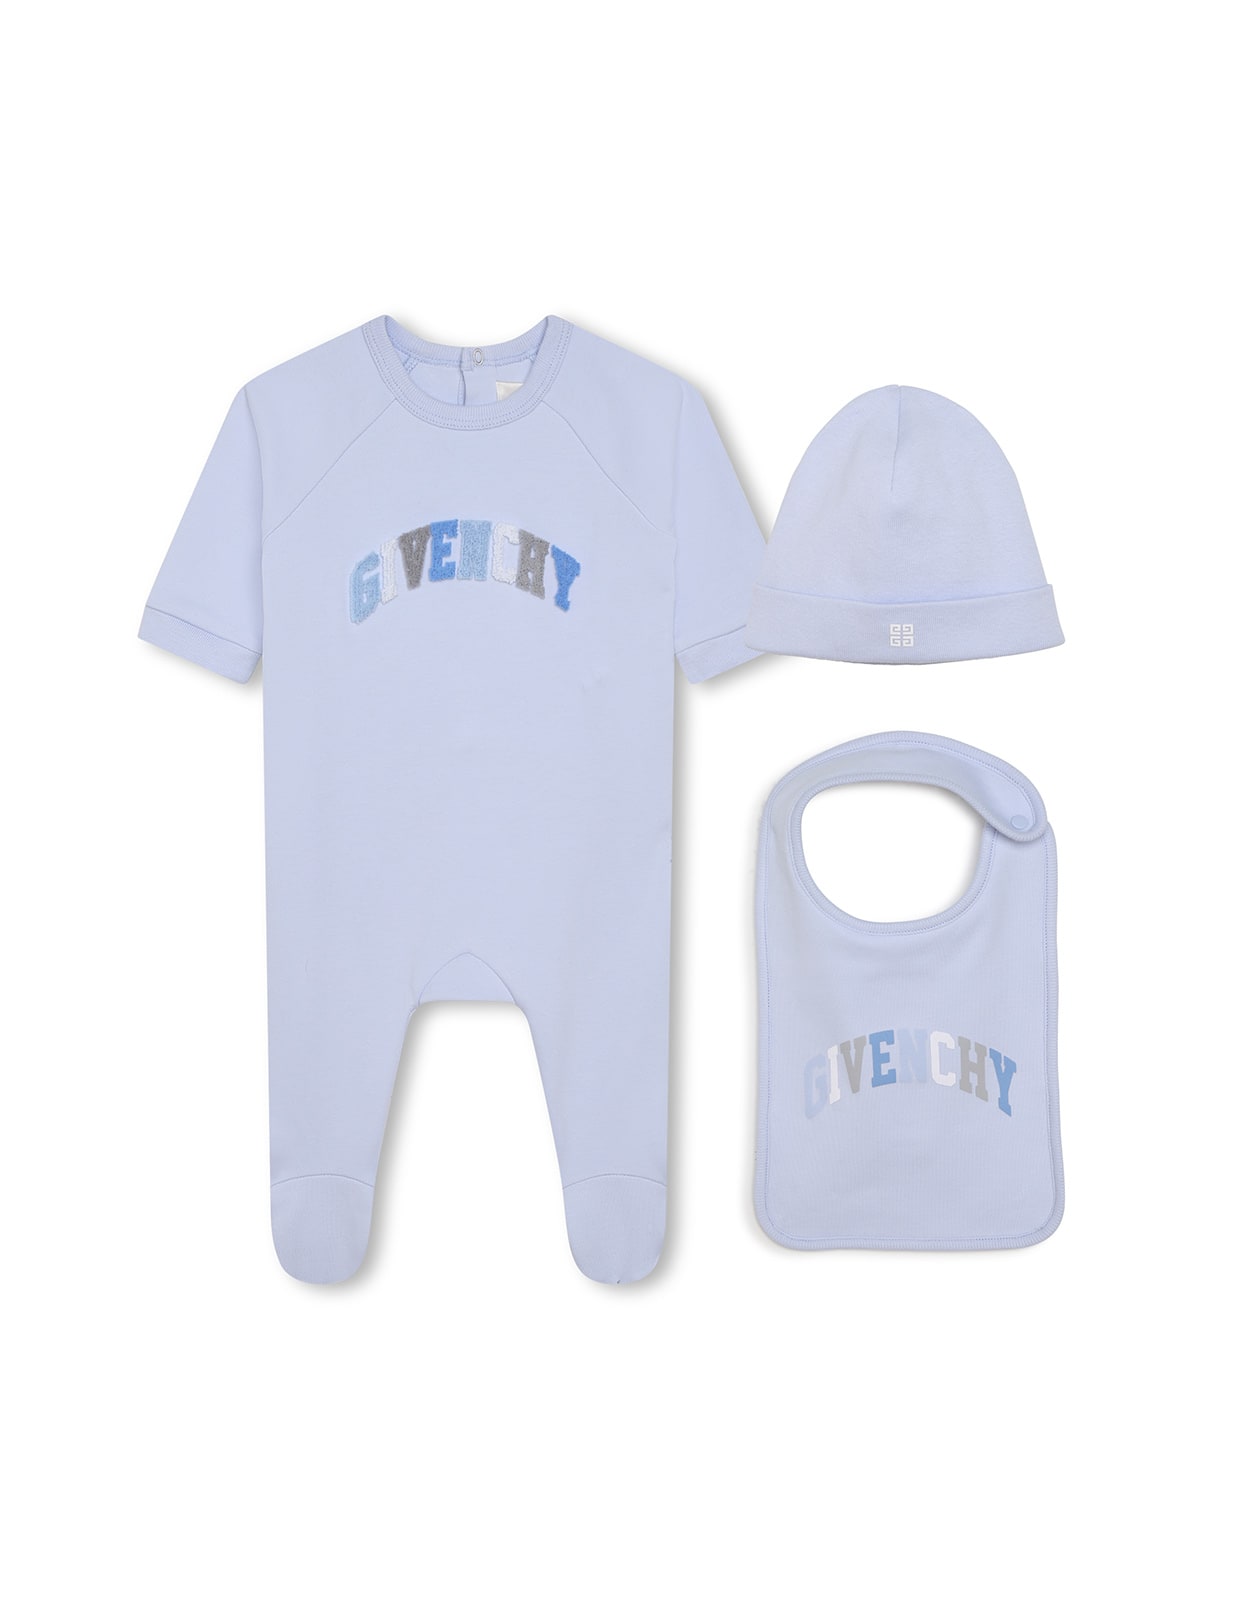 GIVENCHY PLAYSUIT, BEANIE AND BIB SET IN LIGHT BLUE WITH TERRY LOGO